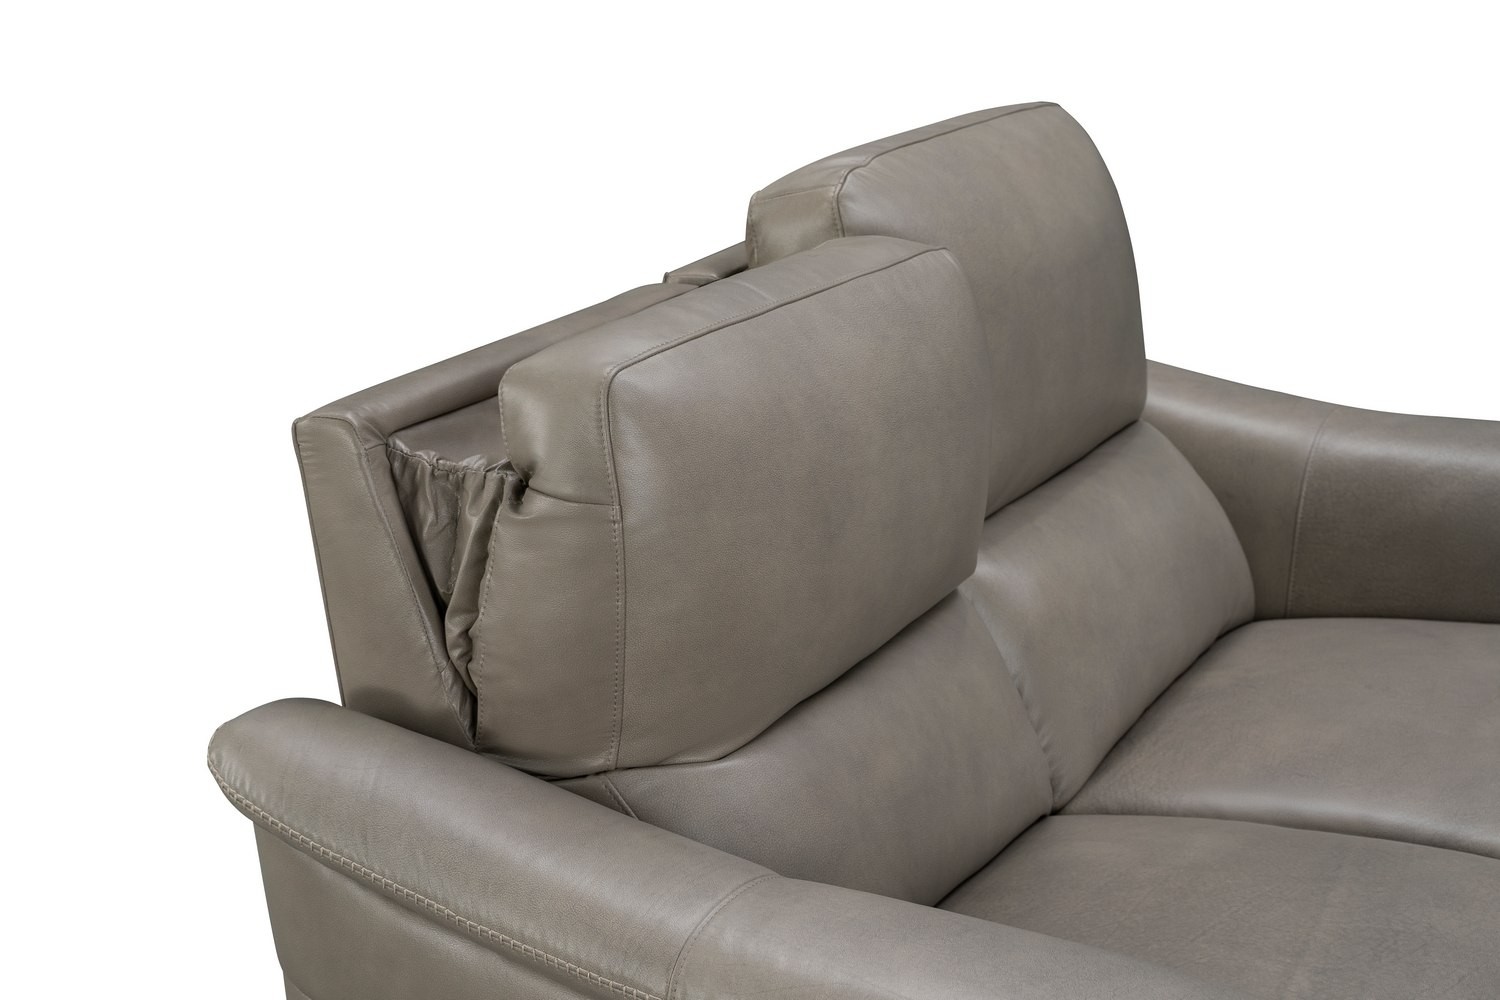 Barcalounger Malone Power Reclining Loveseat with Power Head Rests - Sergi Gray Beige/Leather Match